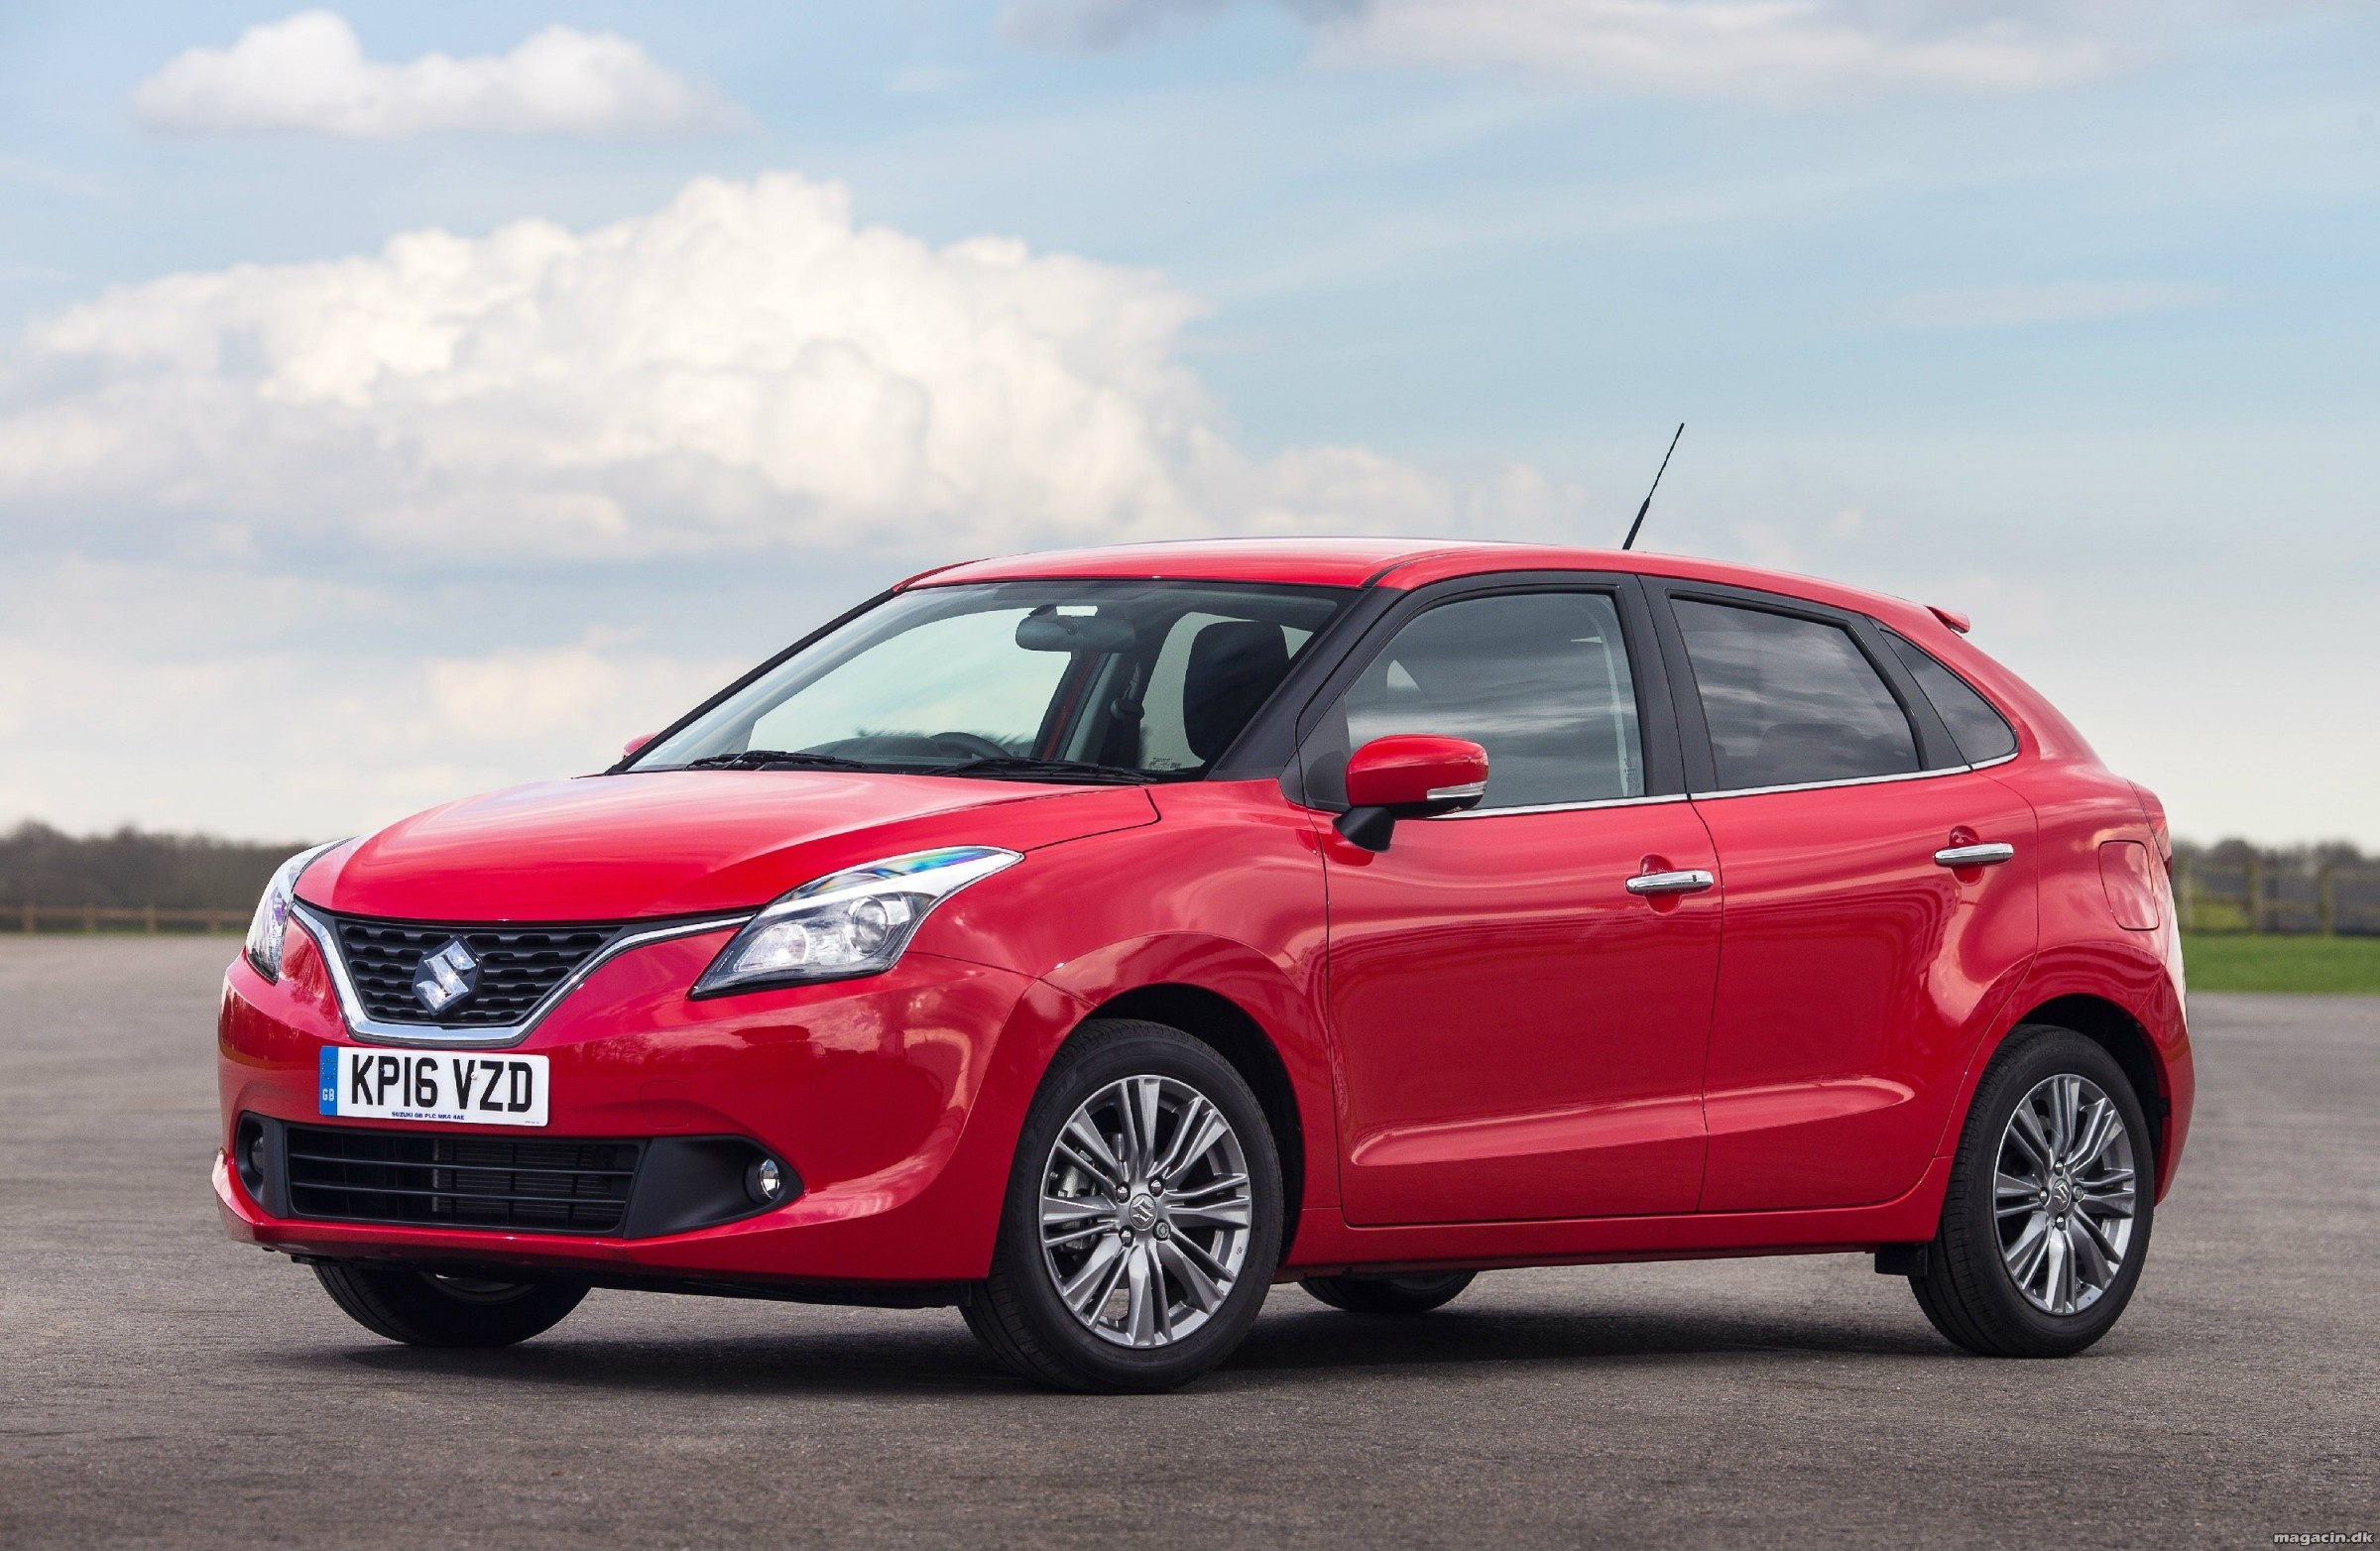 Suzuki Baleno, Free image downloads, Wide range of choices, Cars with character, 2400x1570 HD Desktop